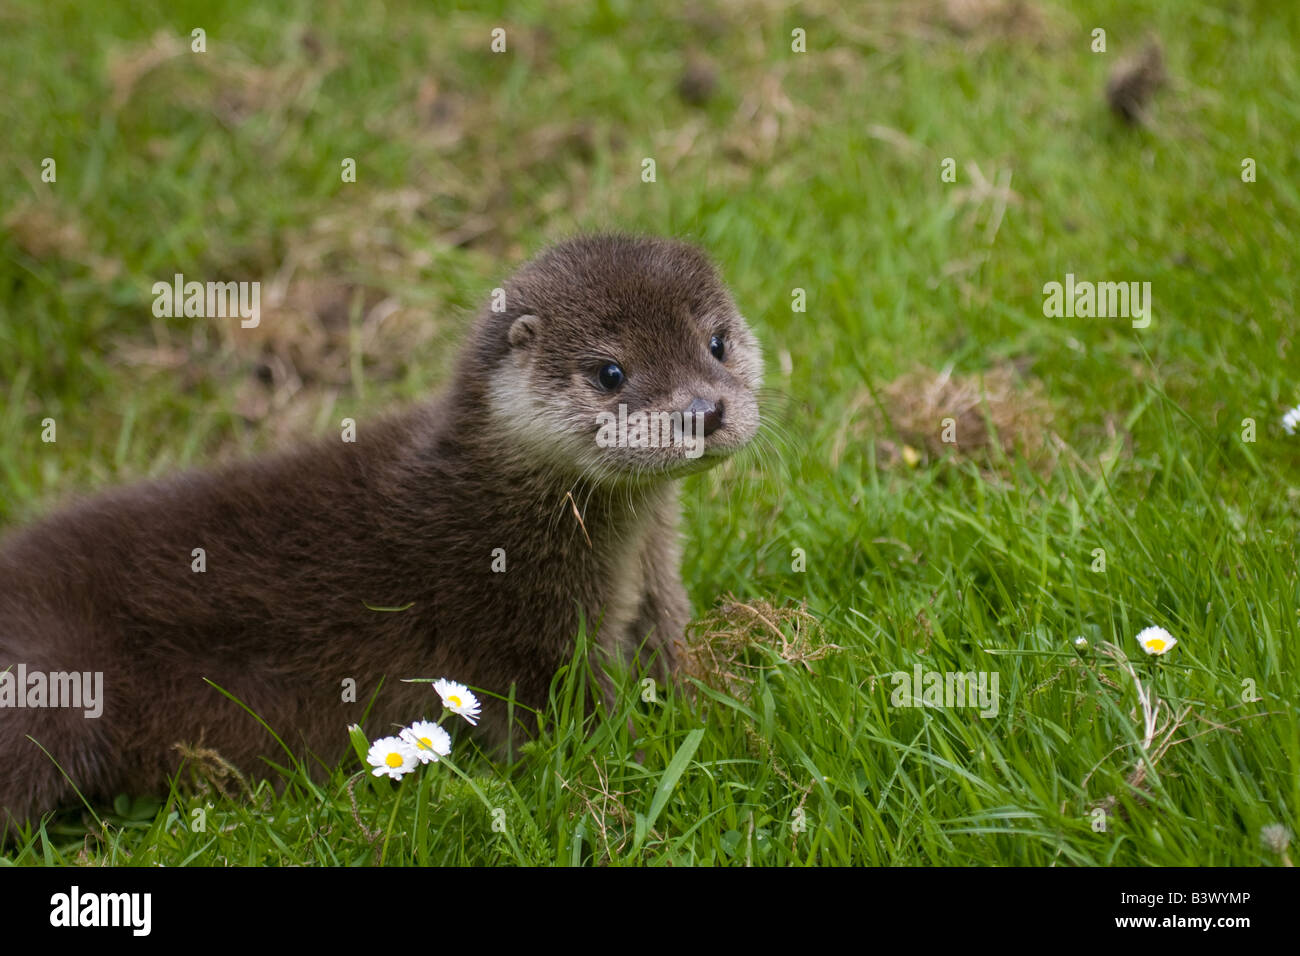 Otter cub on grass with daisies. Stock Photo